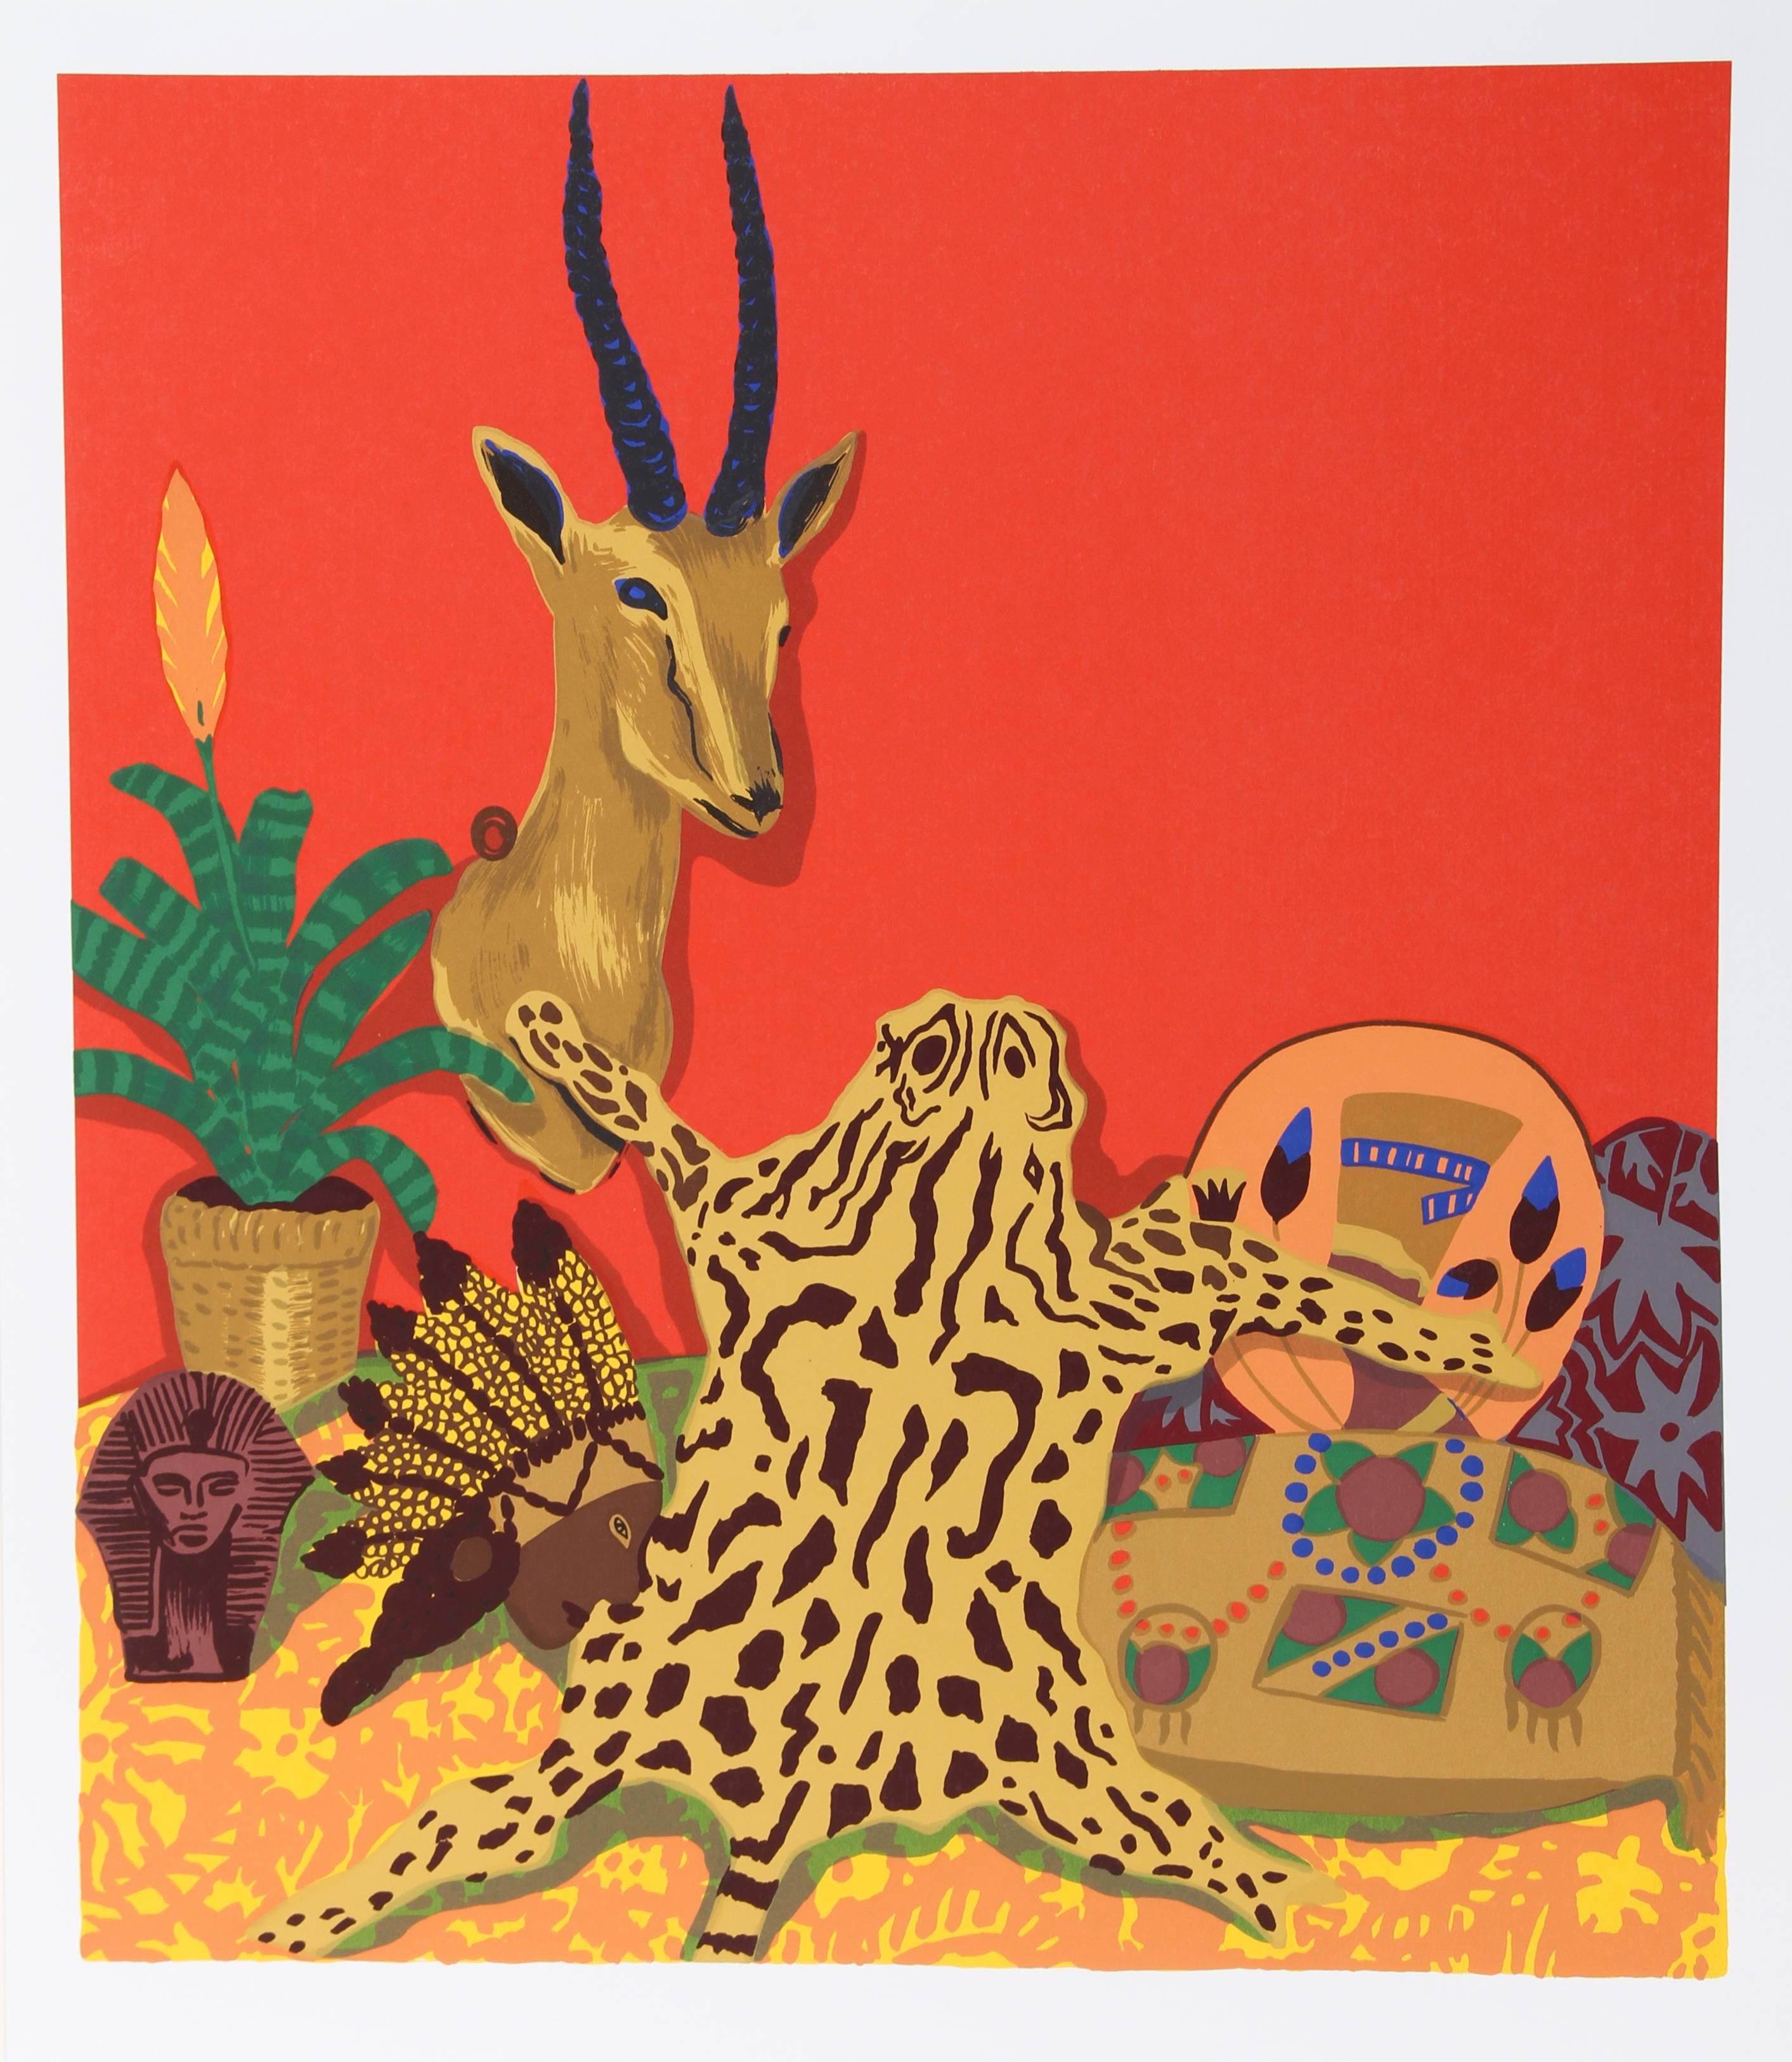 Artist:  Hunt Slonem, American (1951 - )
Title:  Ocelot
Medium:  Serigraph, signed and numbered in pencil
Edition: AP 30 
Image Size:  27.5 x 24 inches
Size:  31 in. x 26.5 in. (78.74 cm x 67.31 cm)